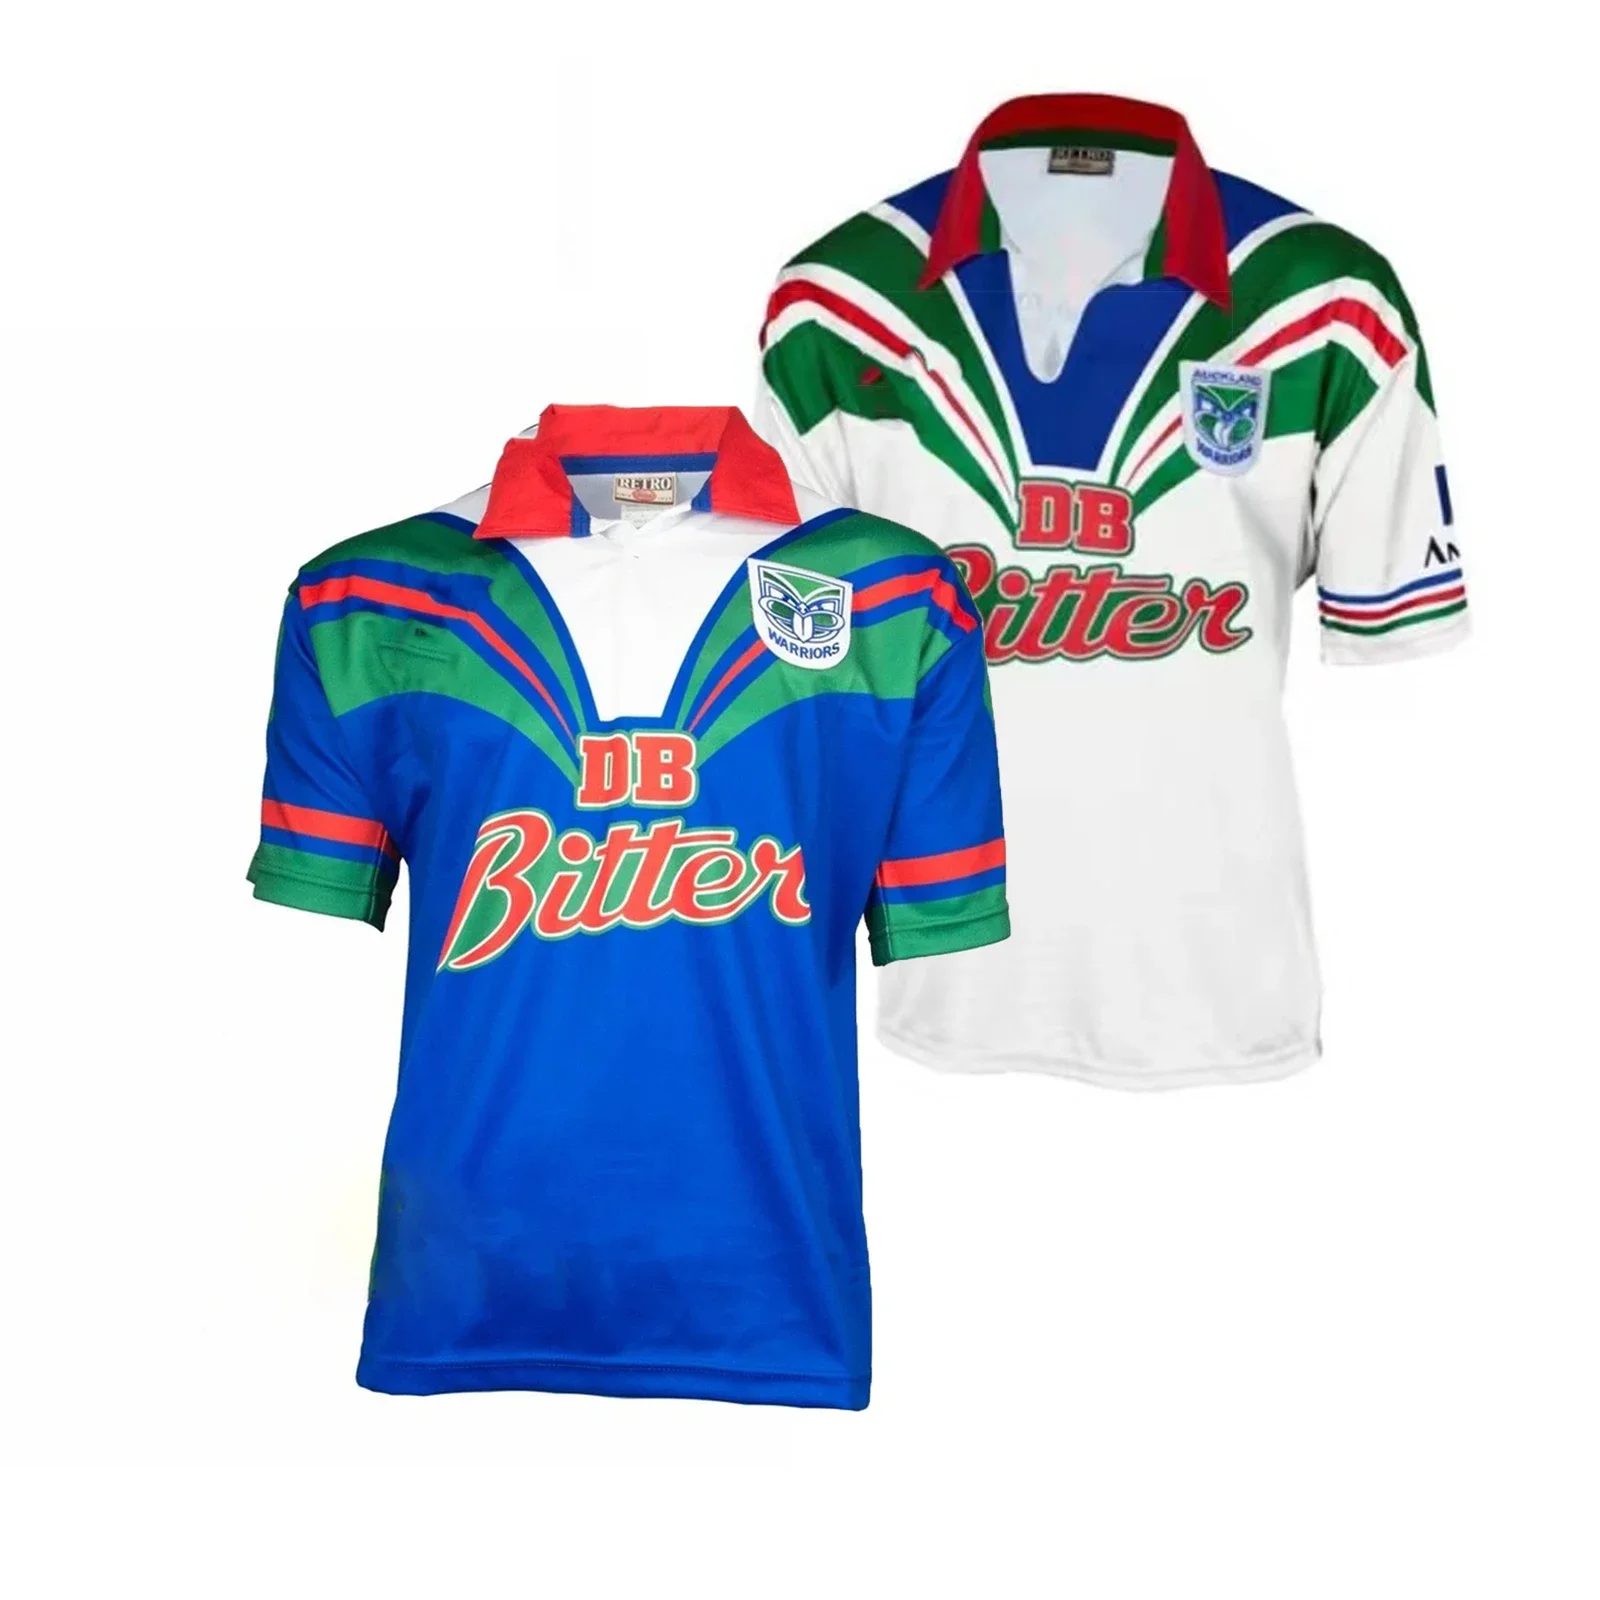 

1995 Warriors Retro Jersey RUGBY JERSEY Sport customize S-5XL